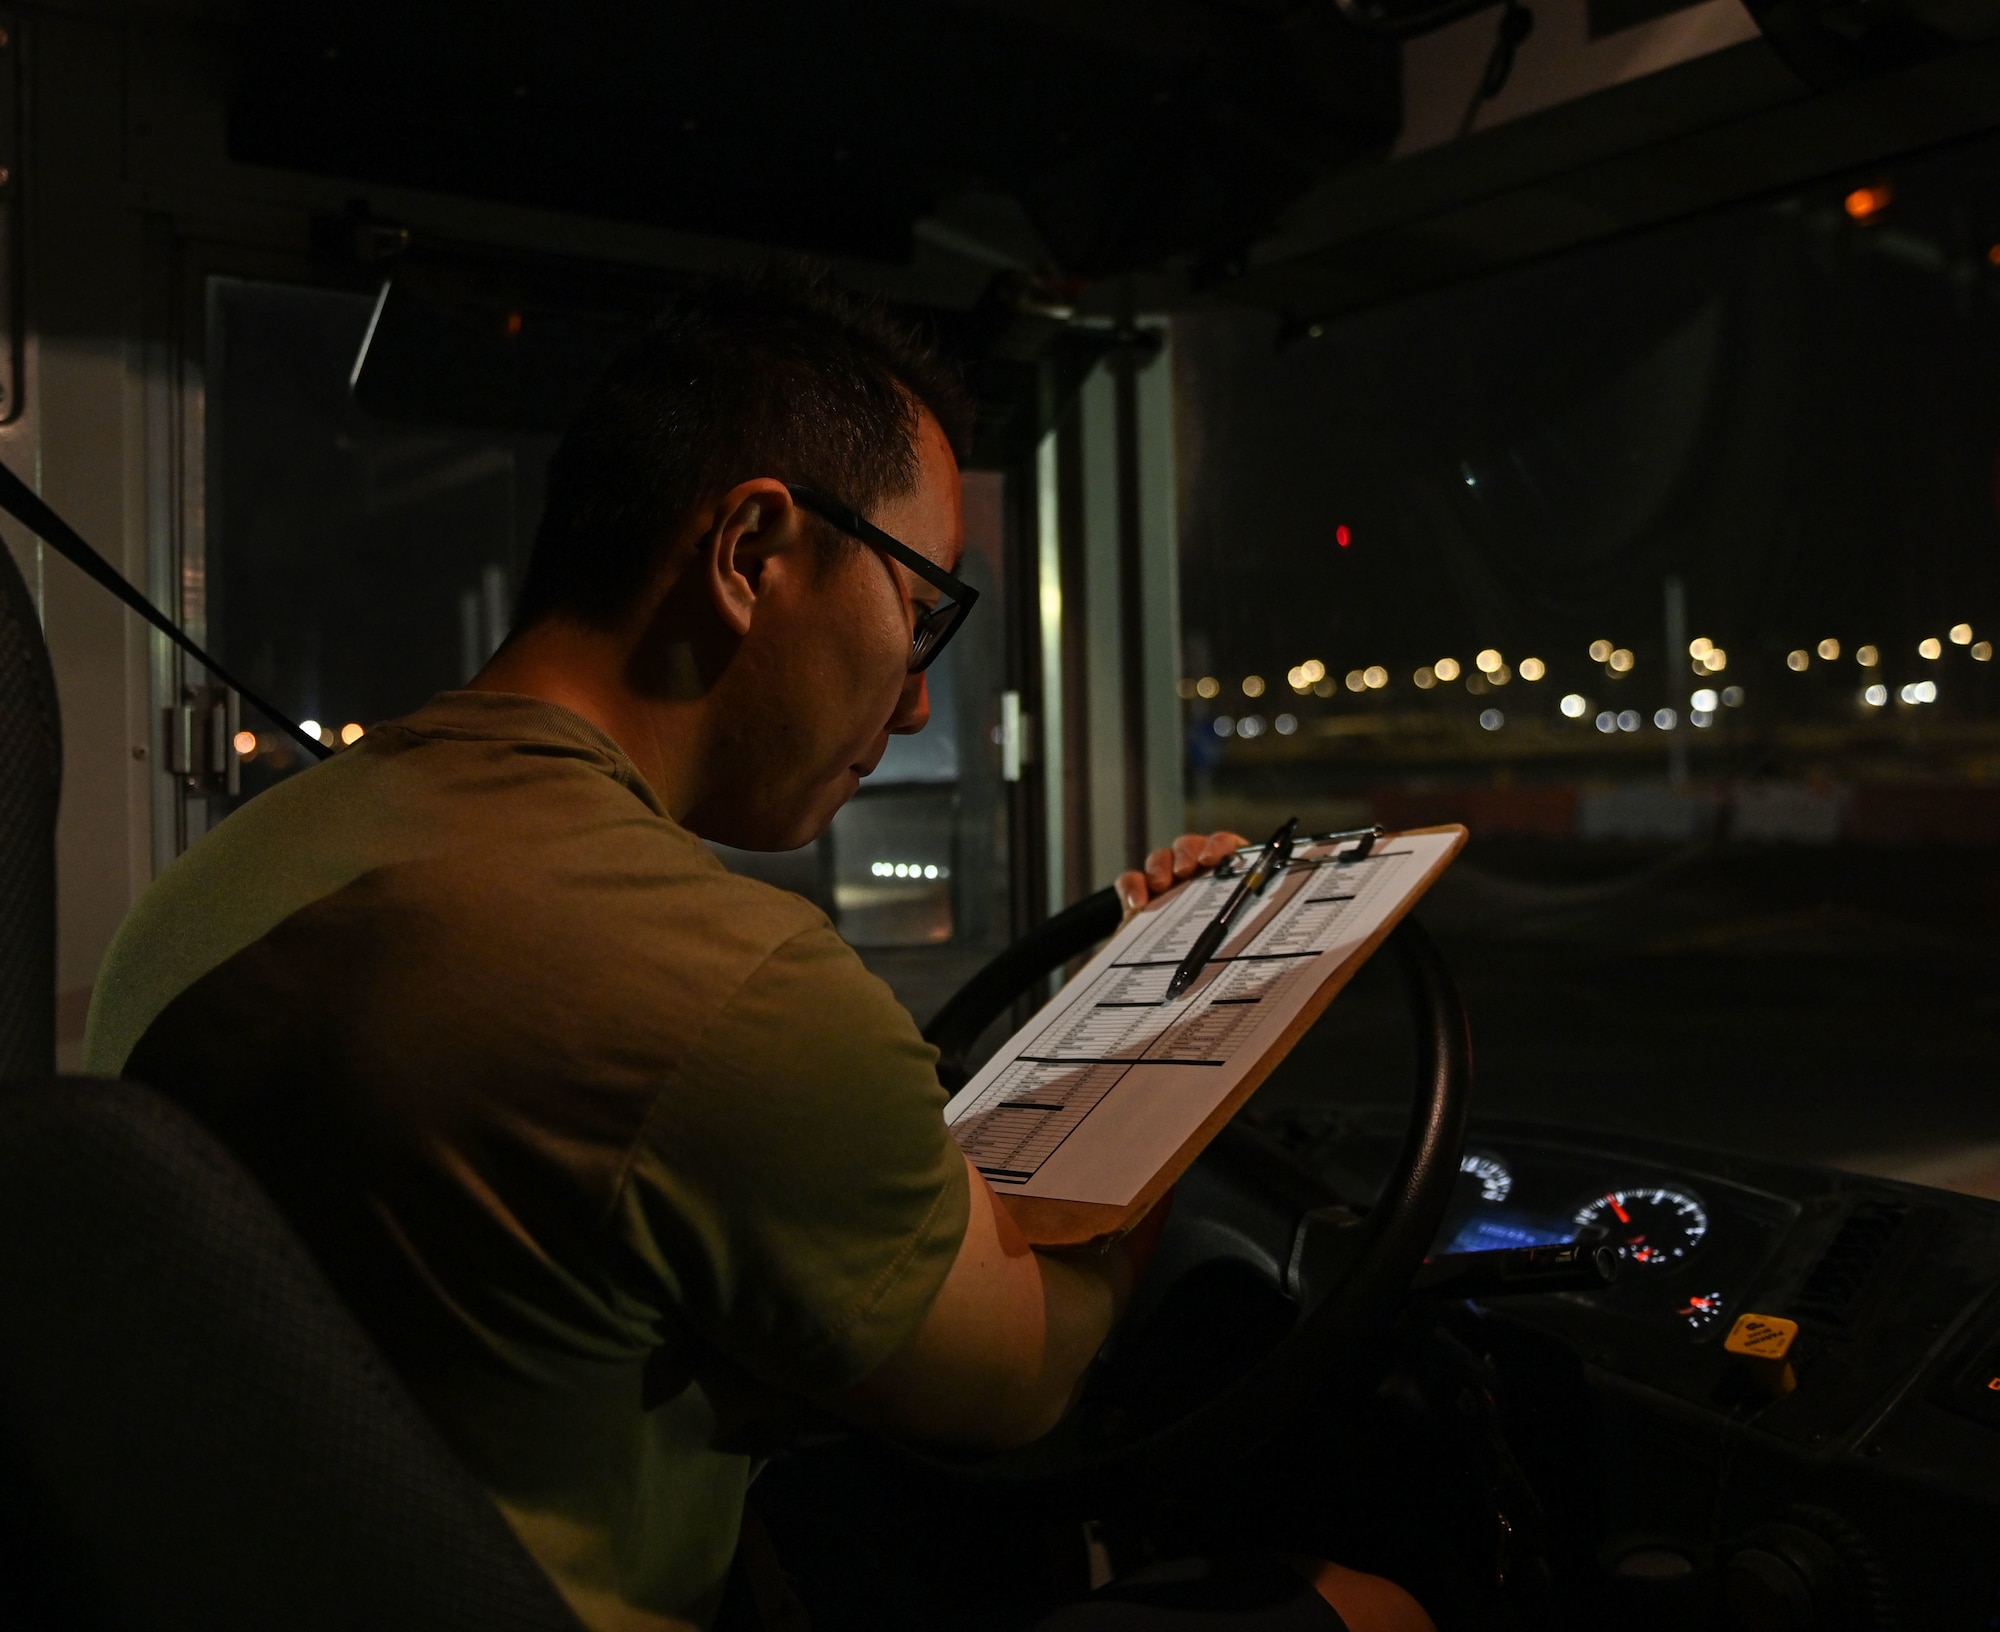 U.S. Air Force Senior Airman Tongil Lee, 379th Expeditionary Logistics Readiness Squadron ground transportation, checks his route log to ensure his shuttle is on schedule Oct. 3, 2022 at Al Udeid Air Base, Qatar. The base shuttle system makes 400 stops a day and helps AUAB members get to their destination. (U.S. Air National Guard photo by Master Sgt. Michael J. Kelly)